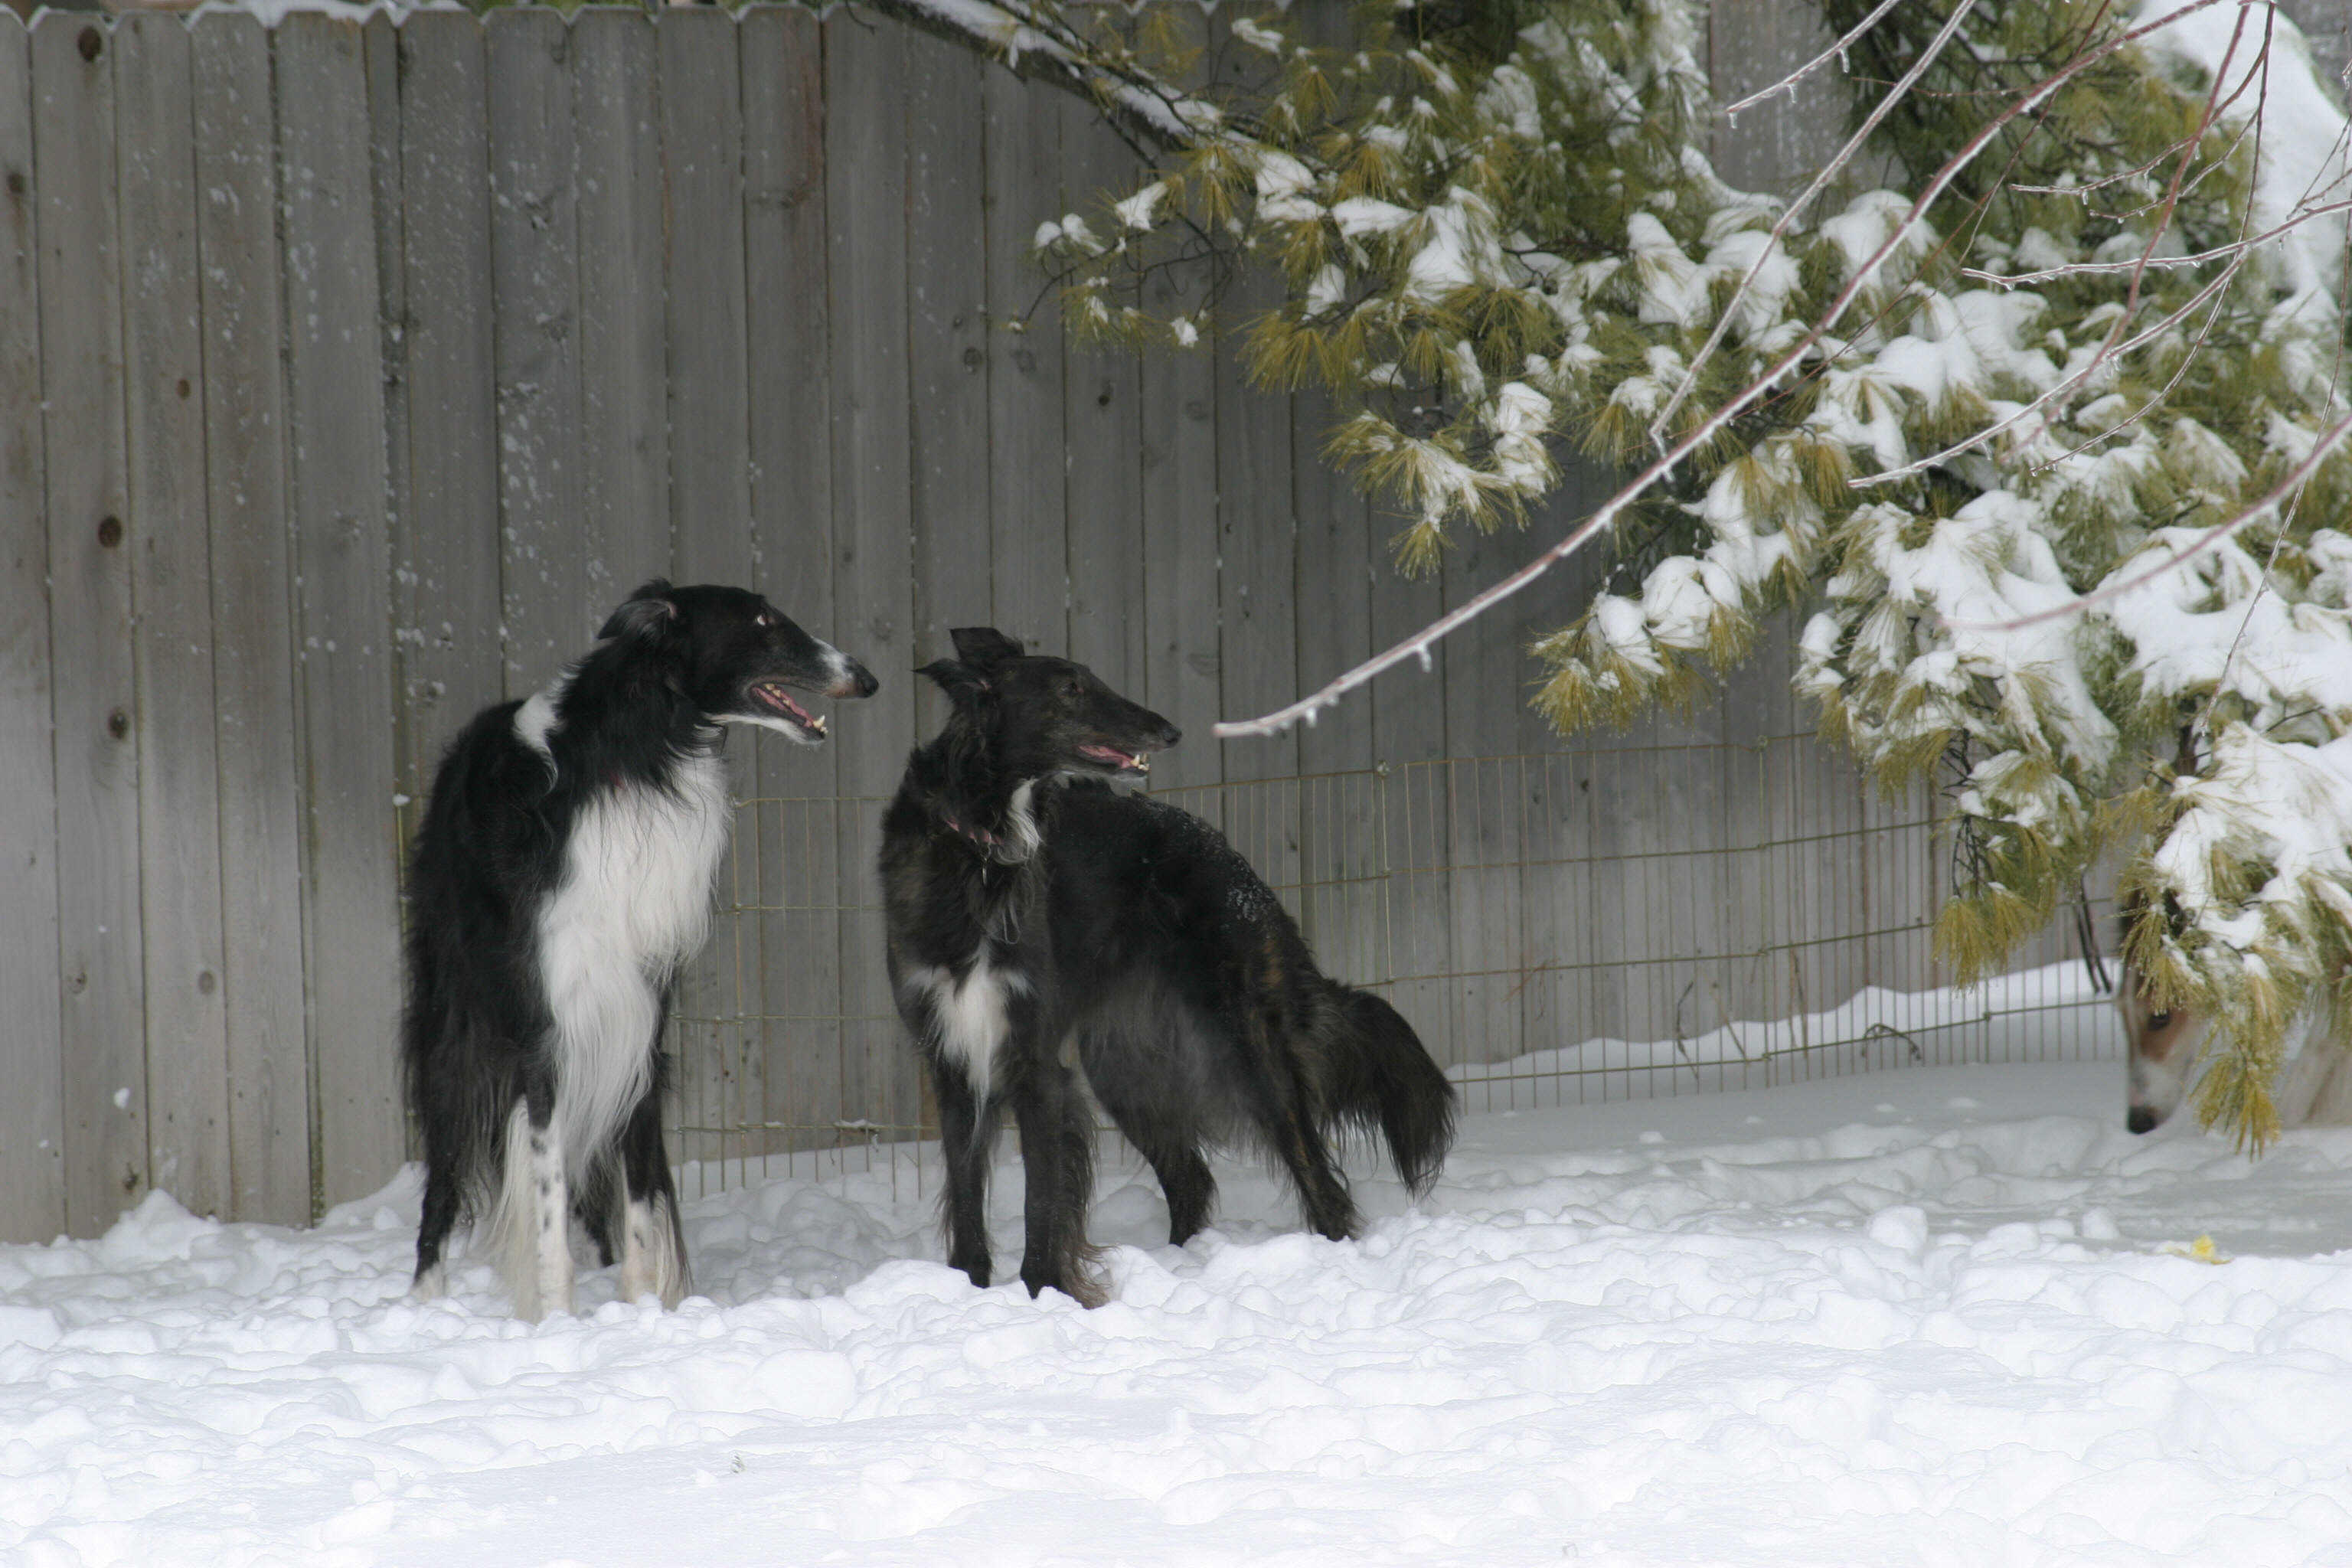 Syrus and Stryx in snow 2009